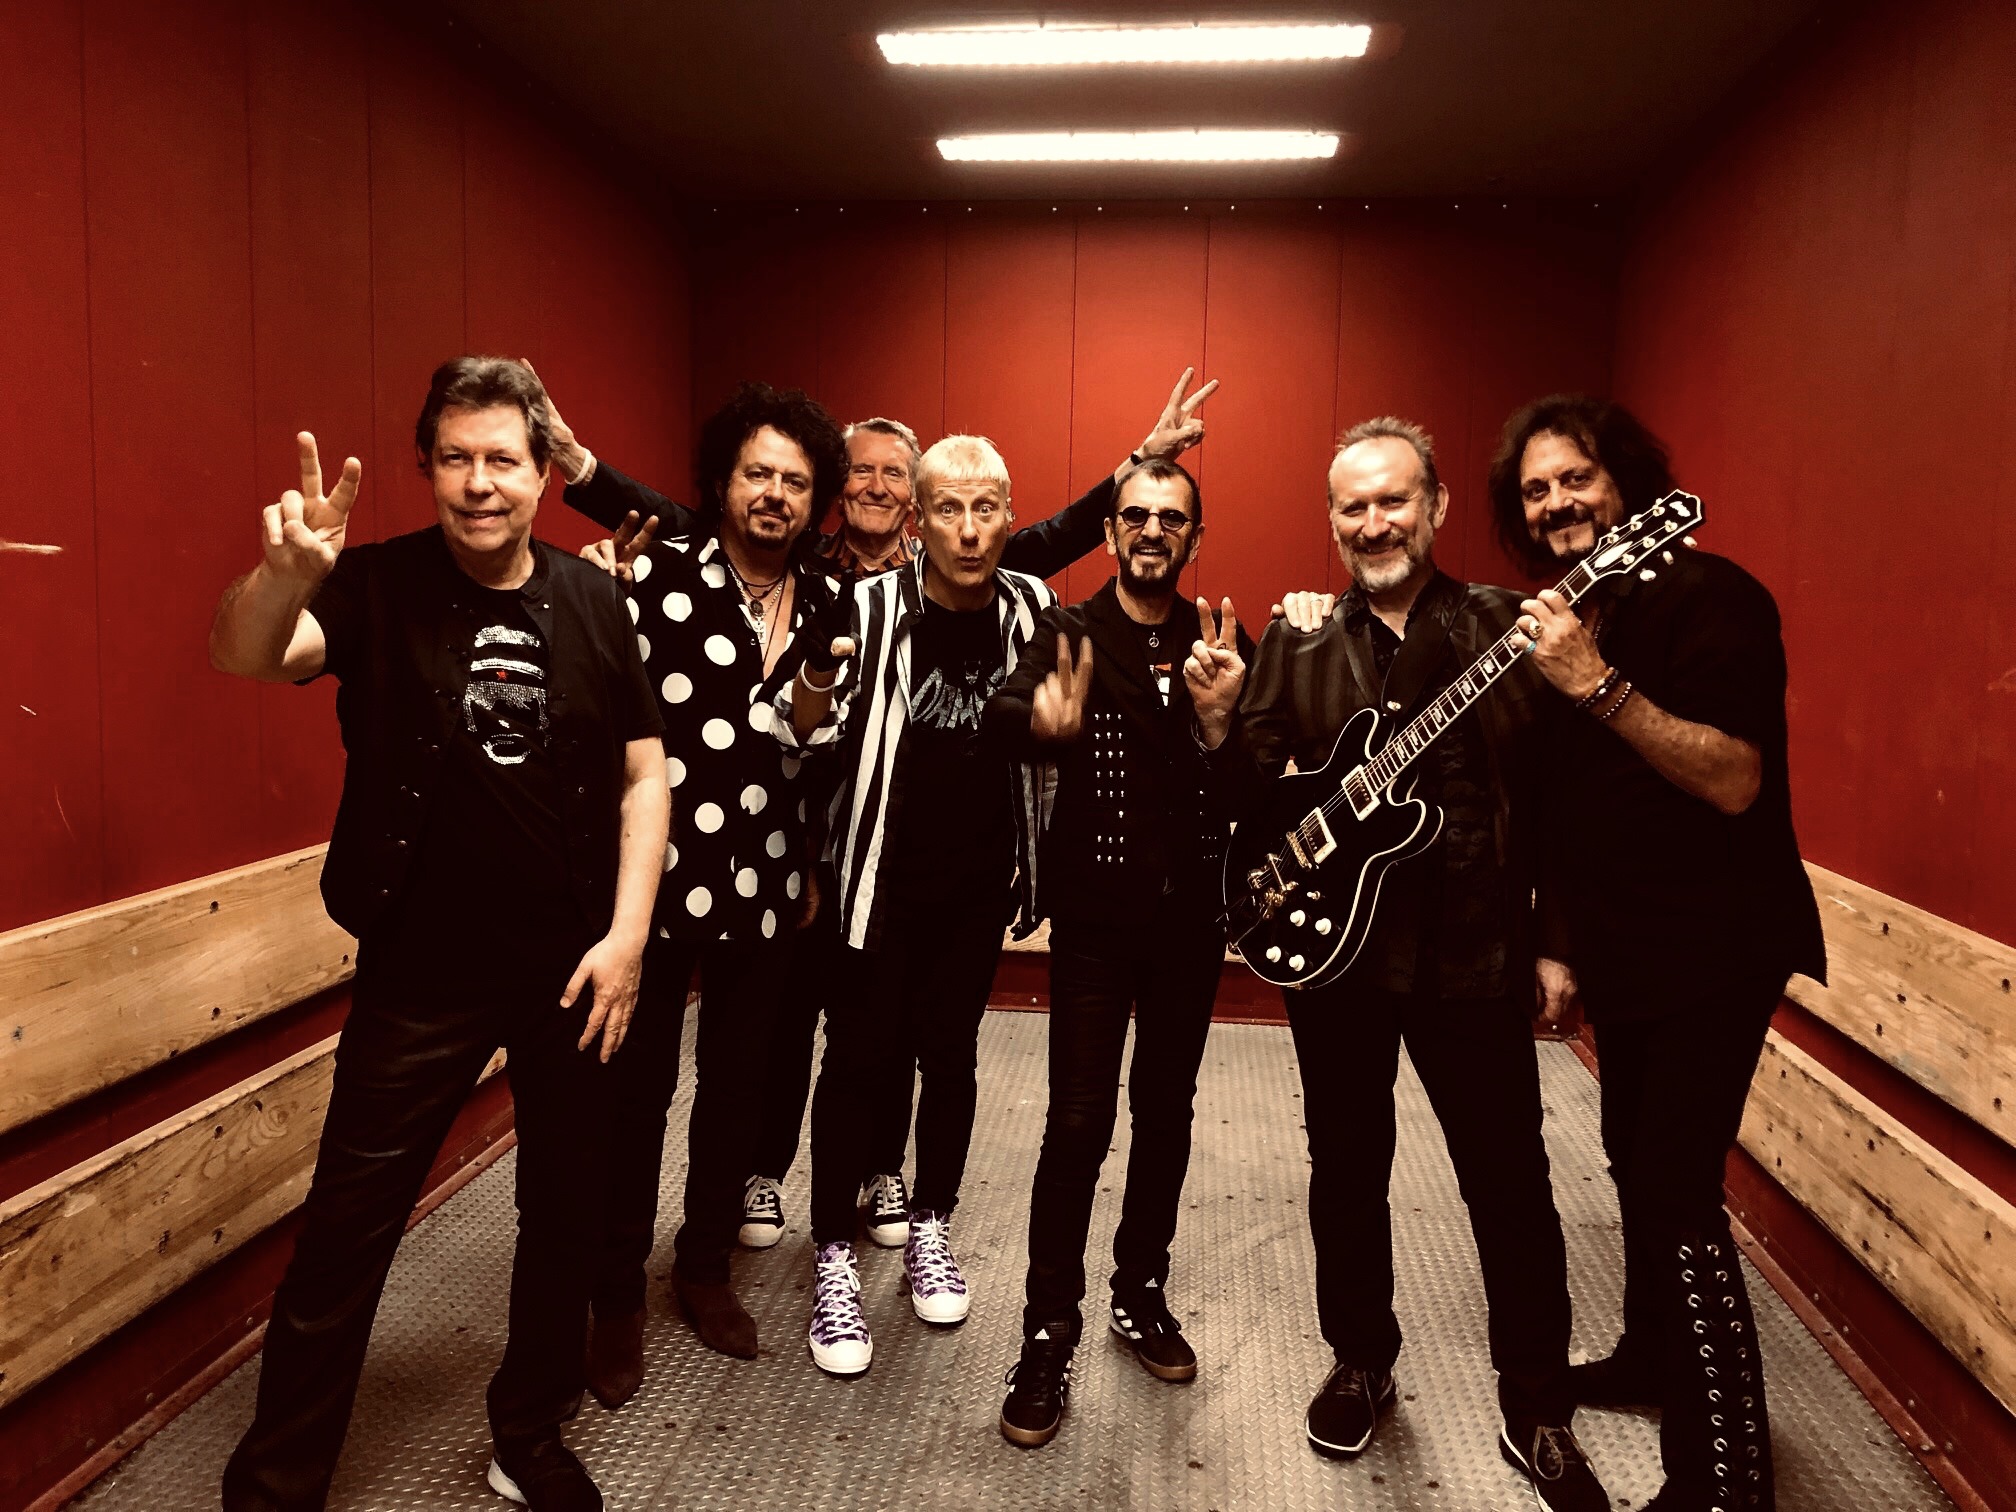 Ringo Starr and His AllStarr Band Tour 2019 Pictures from the Road